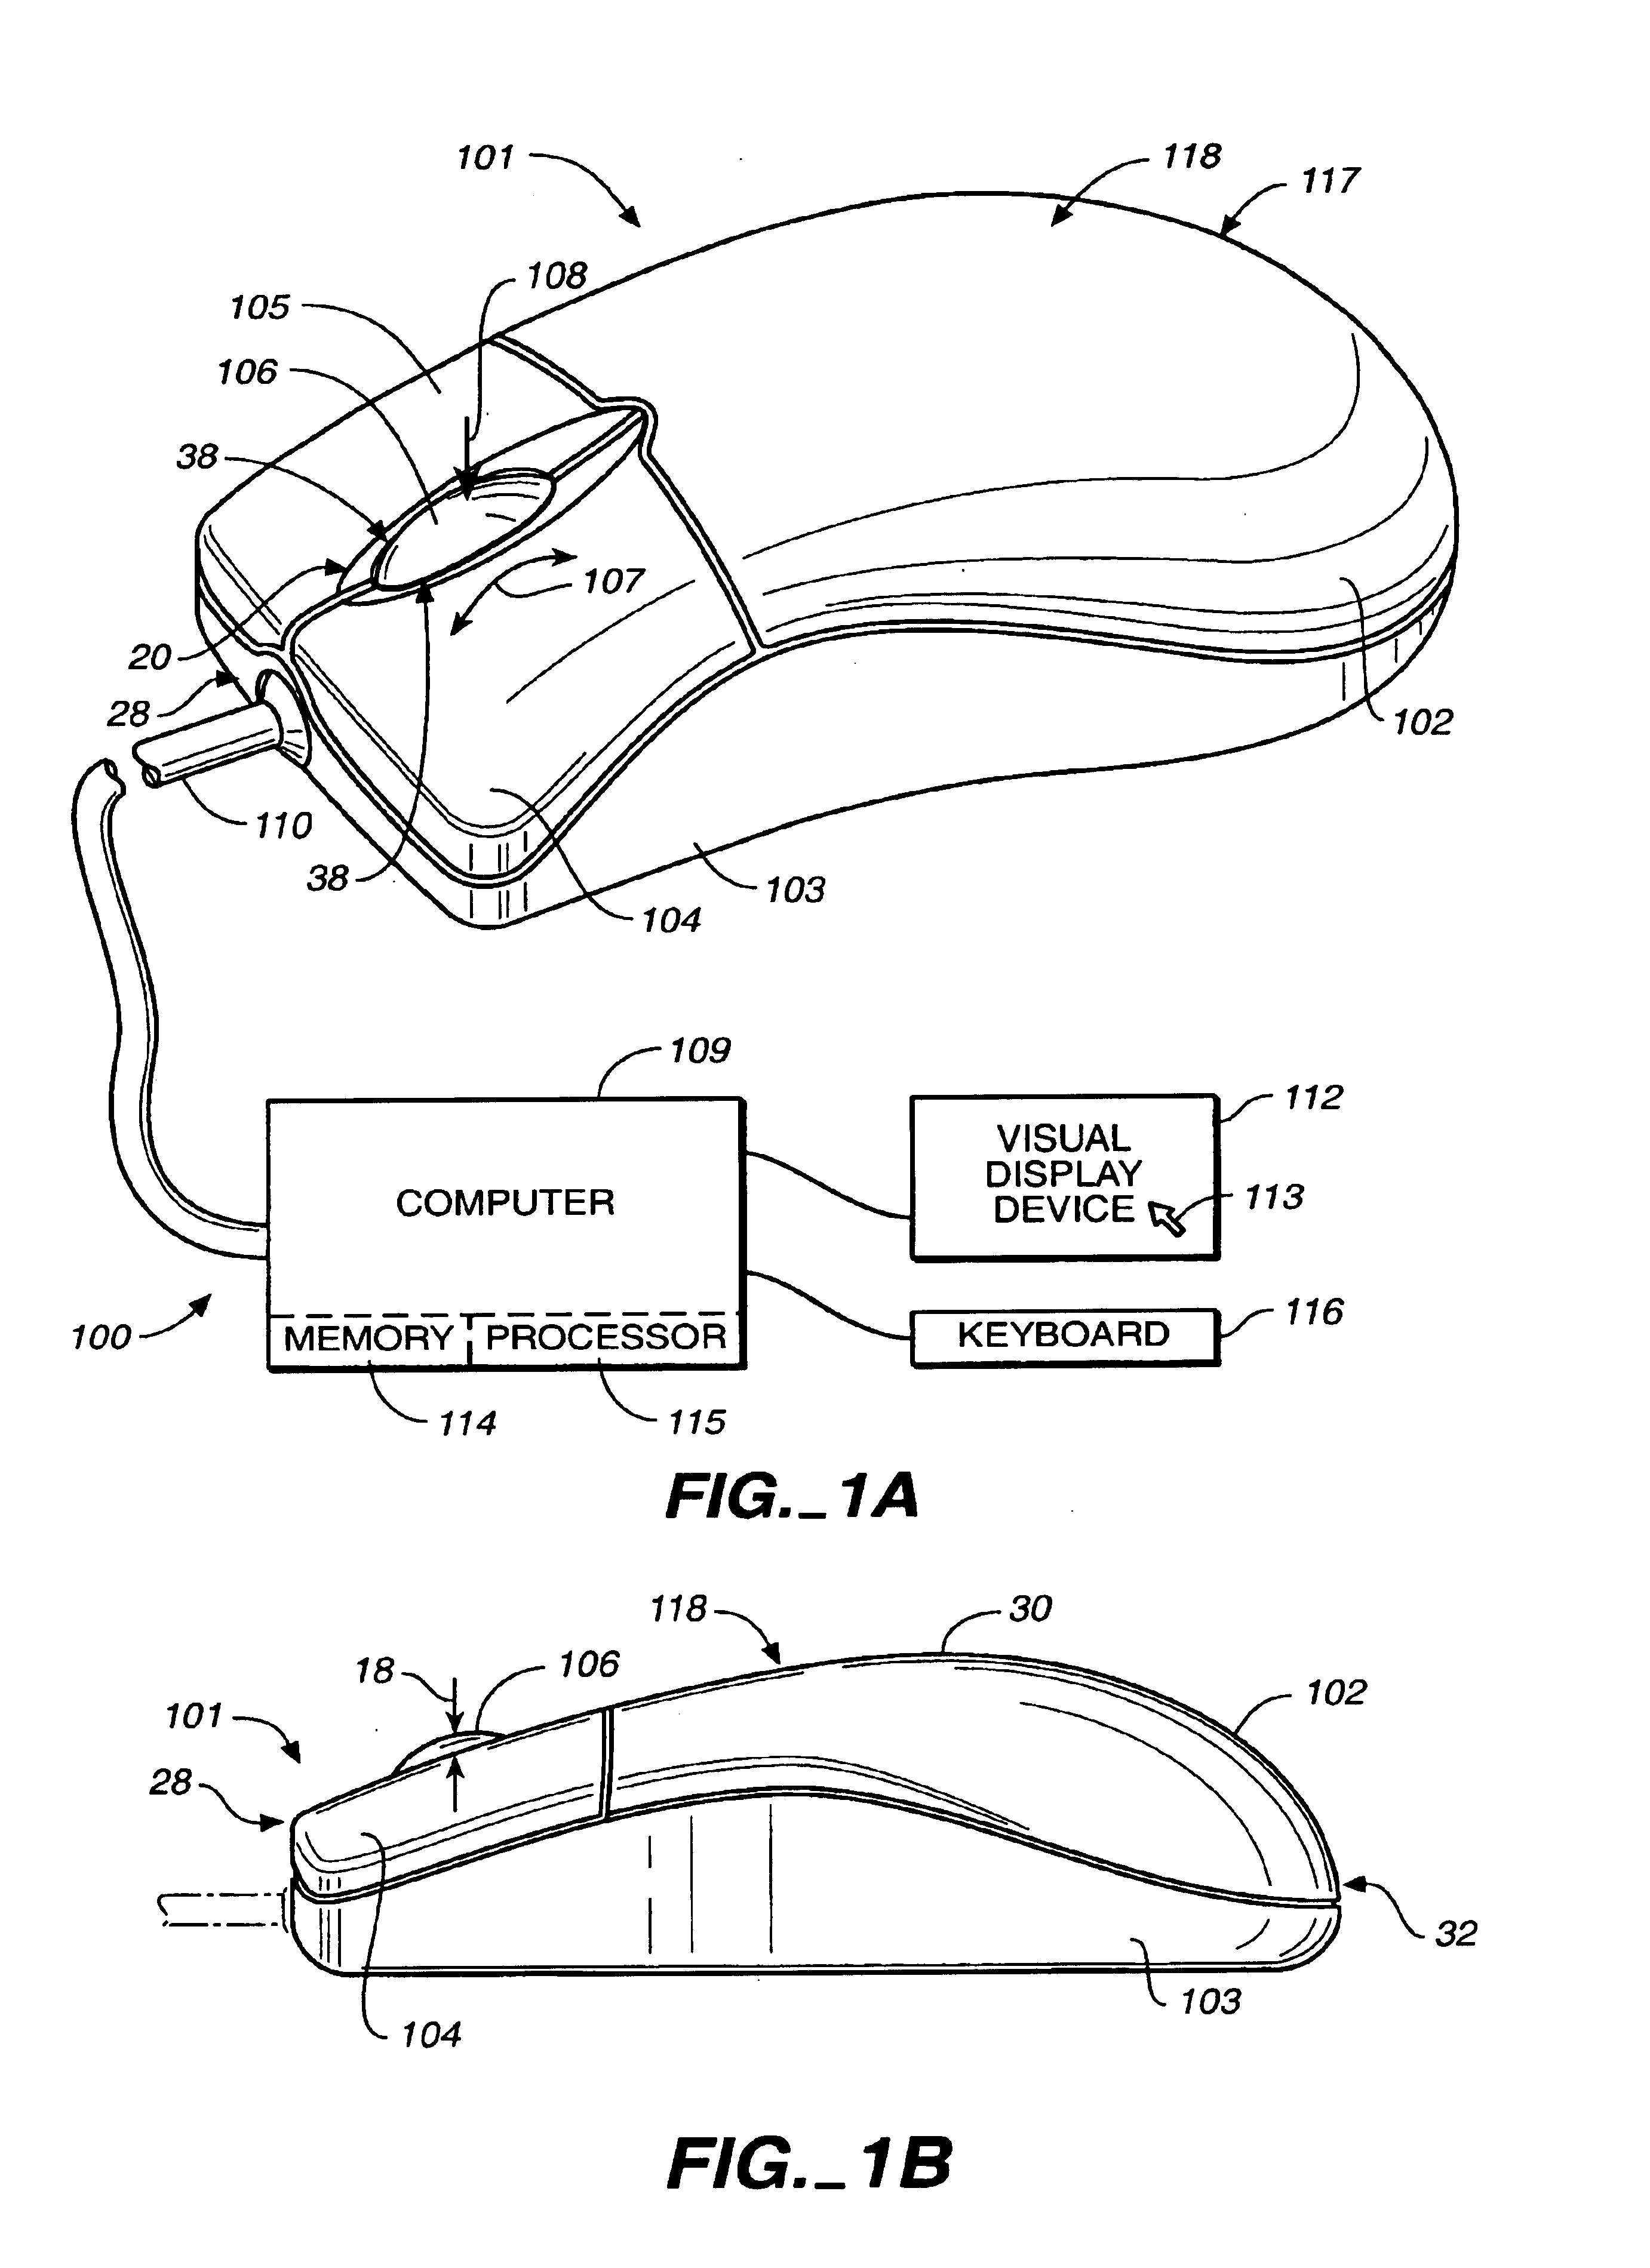 System and method of adjusting display characteristics of a displayable data file using an ergonomic computer input device